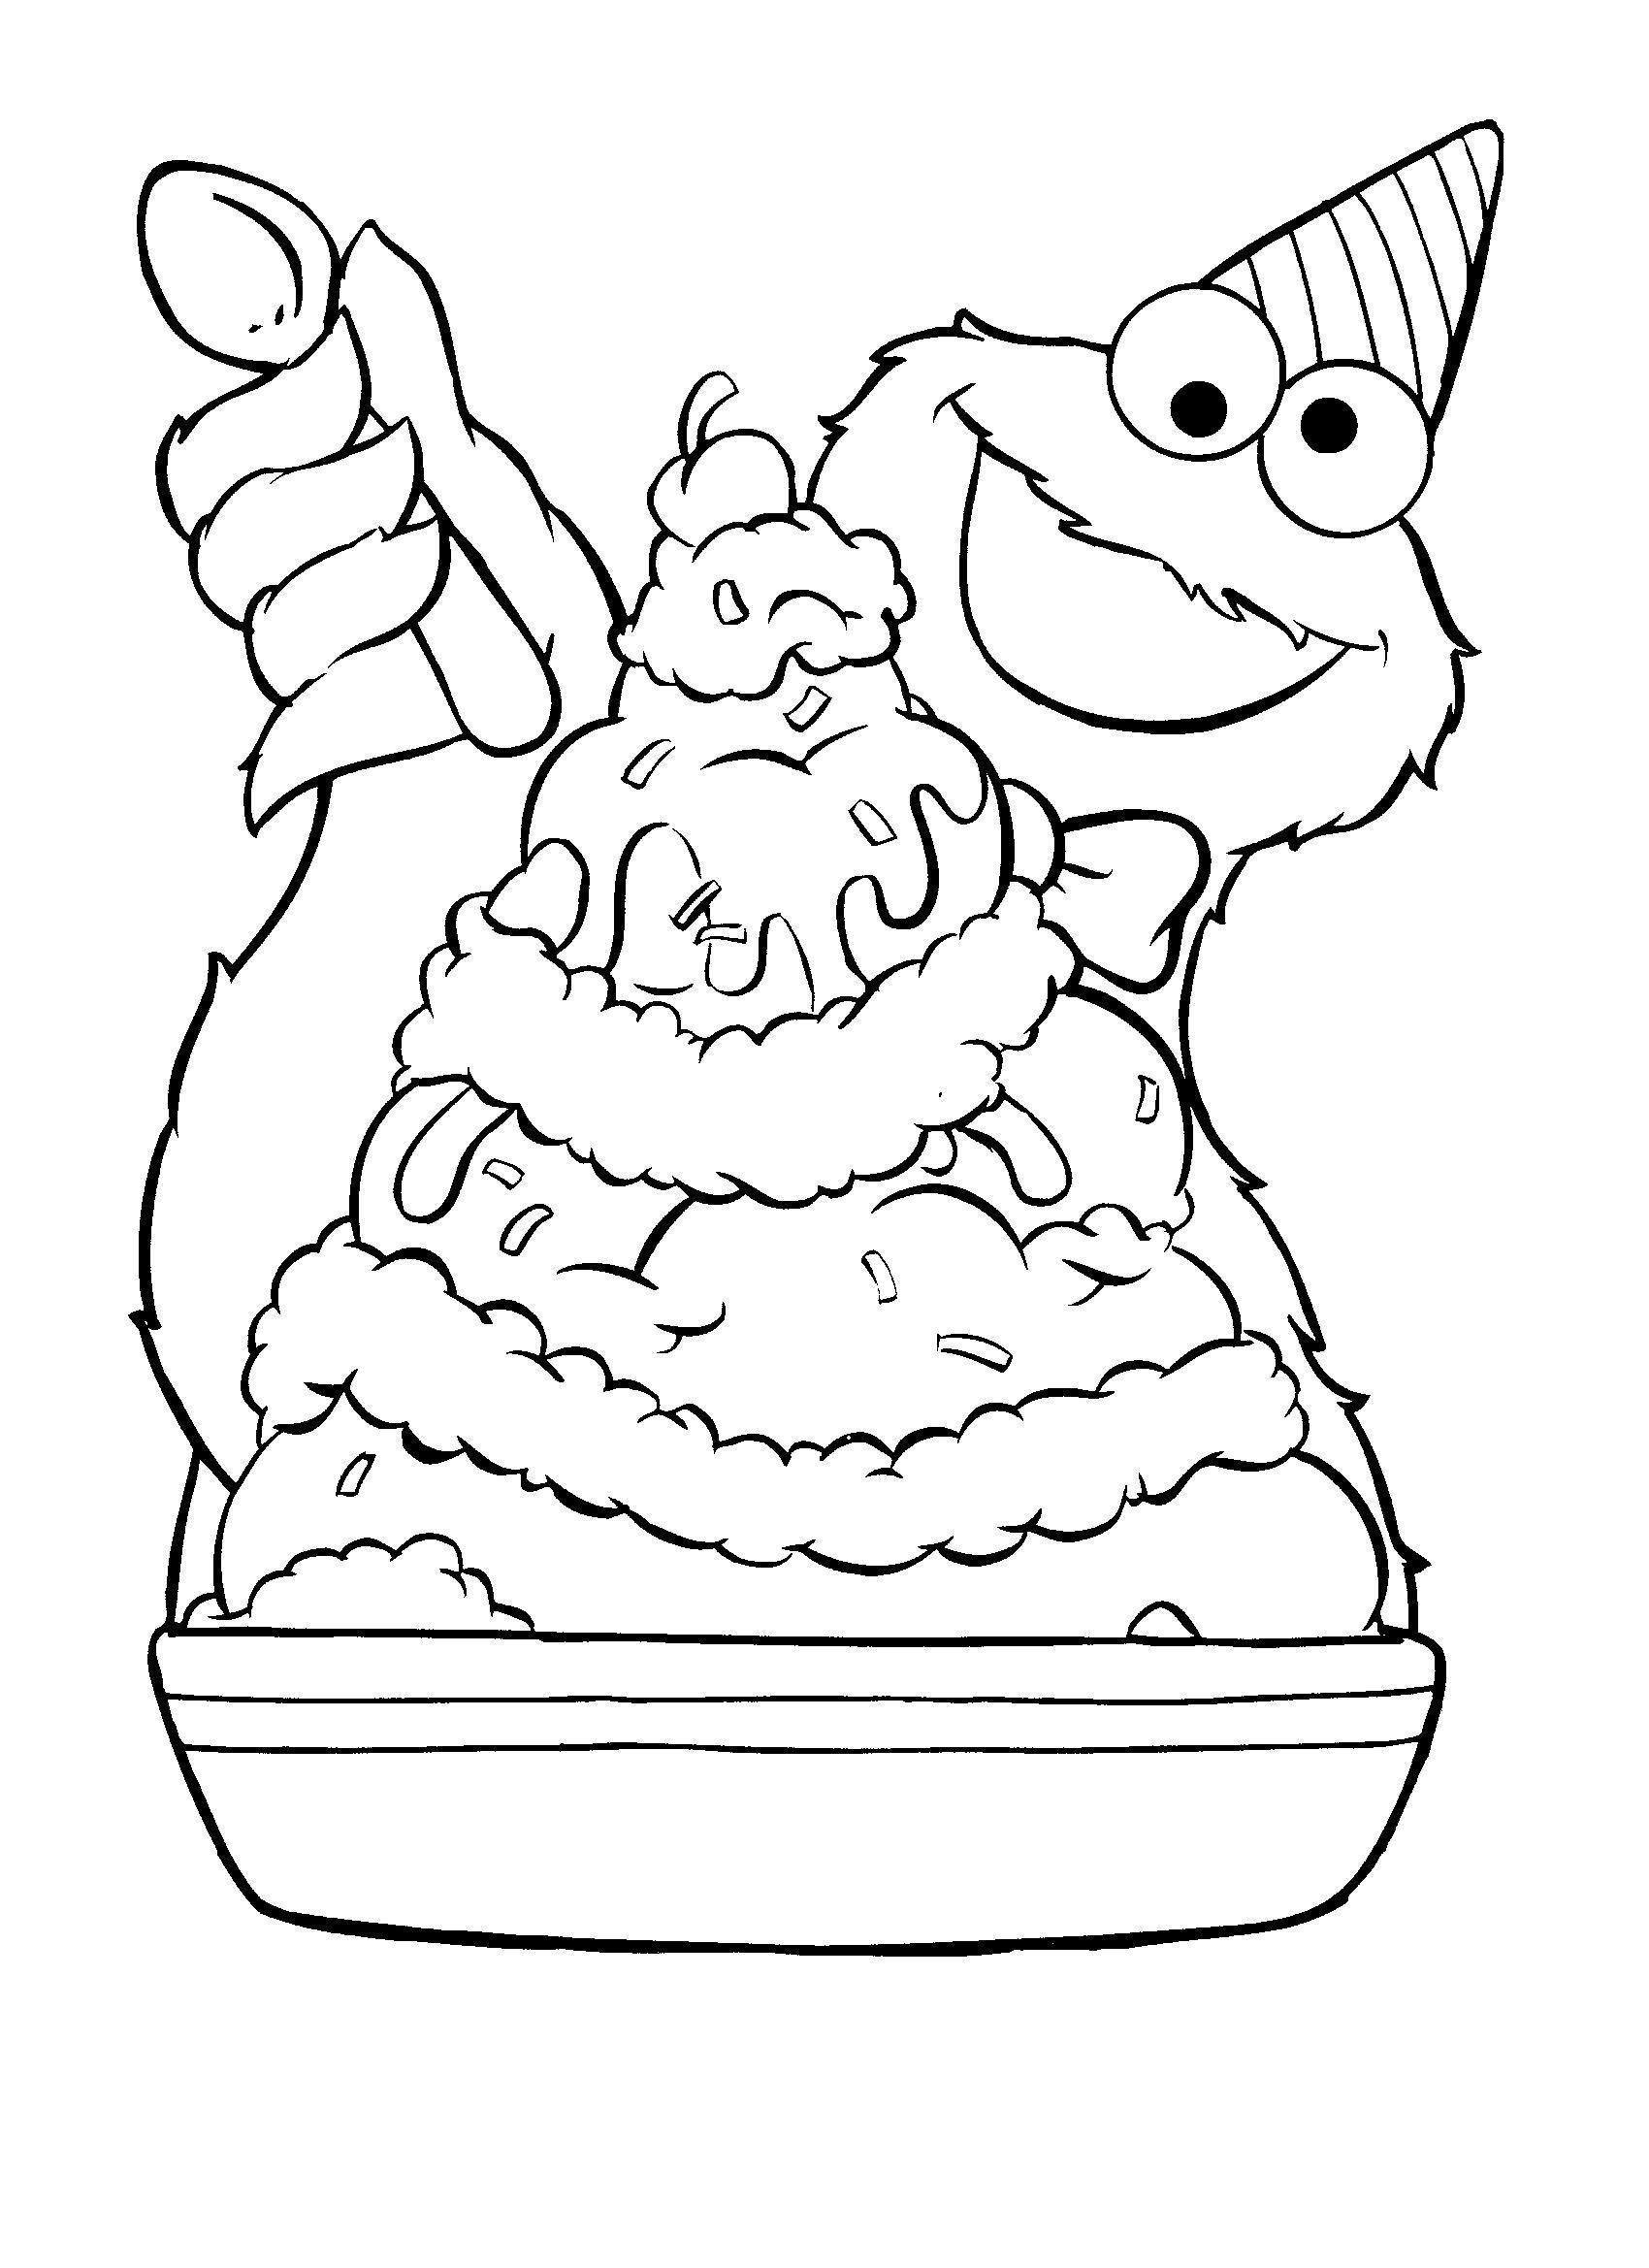 Cookie Monster And Elmo Coloring Pages at GetColorings.com | Free